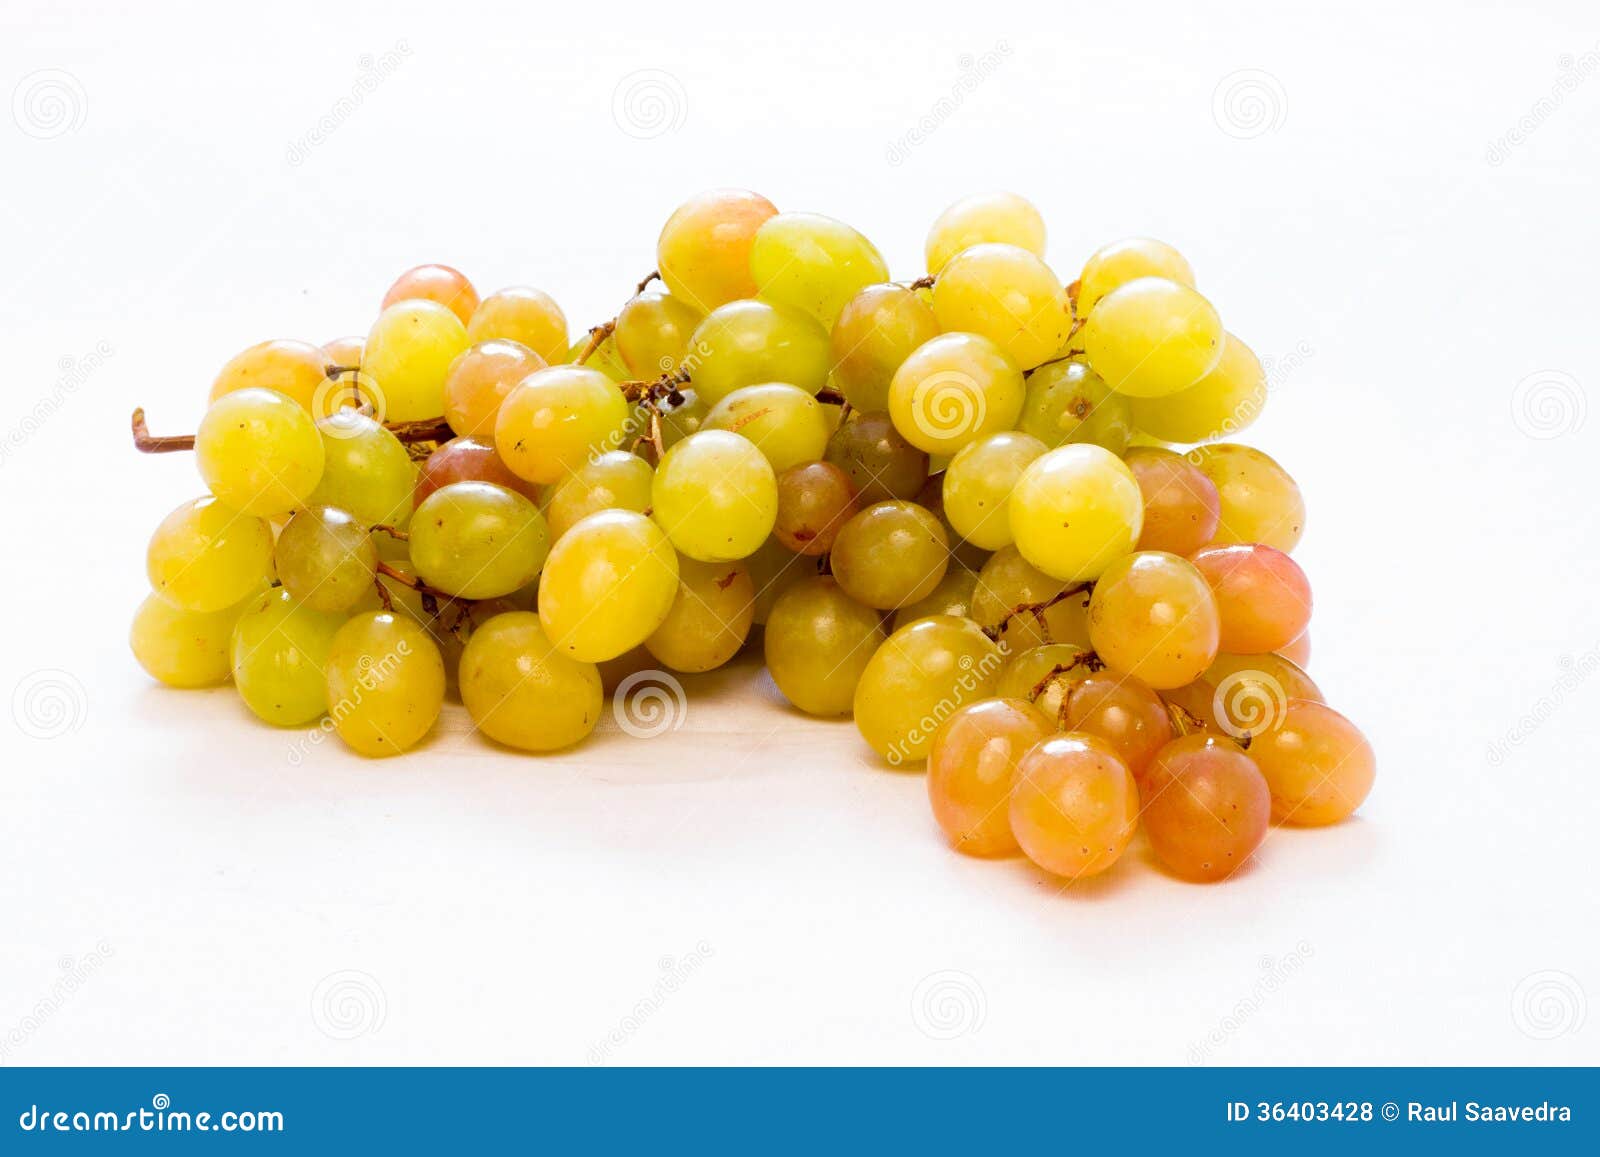 photograph of grapes